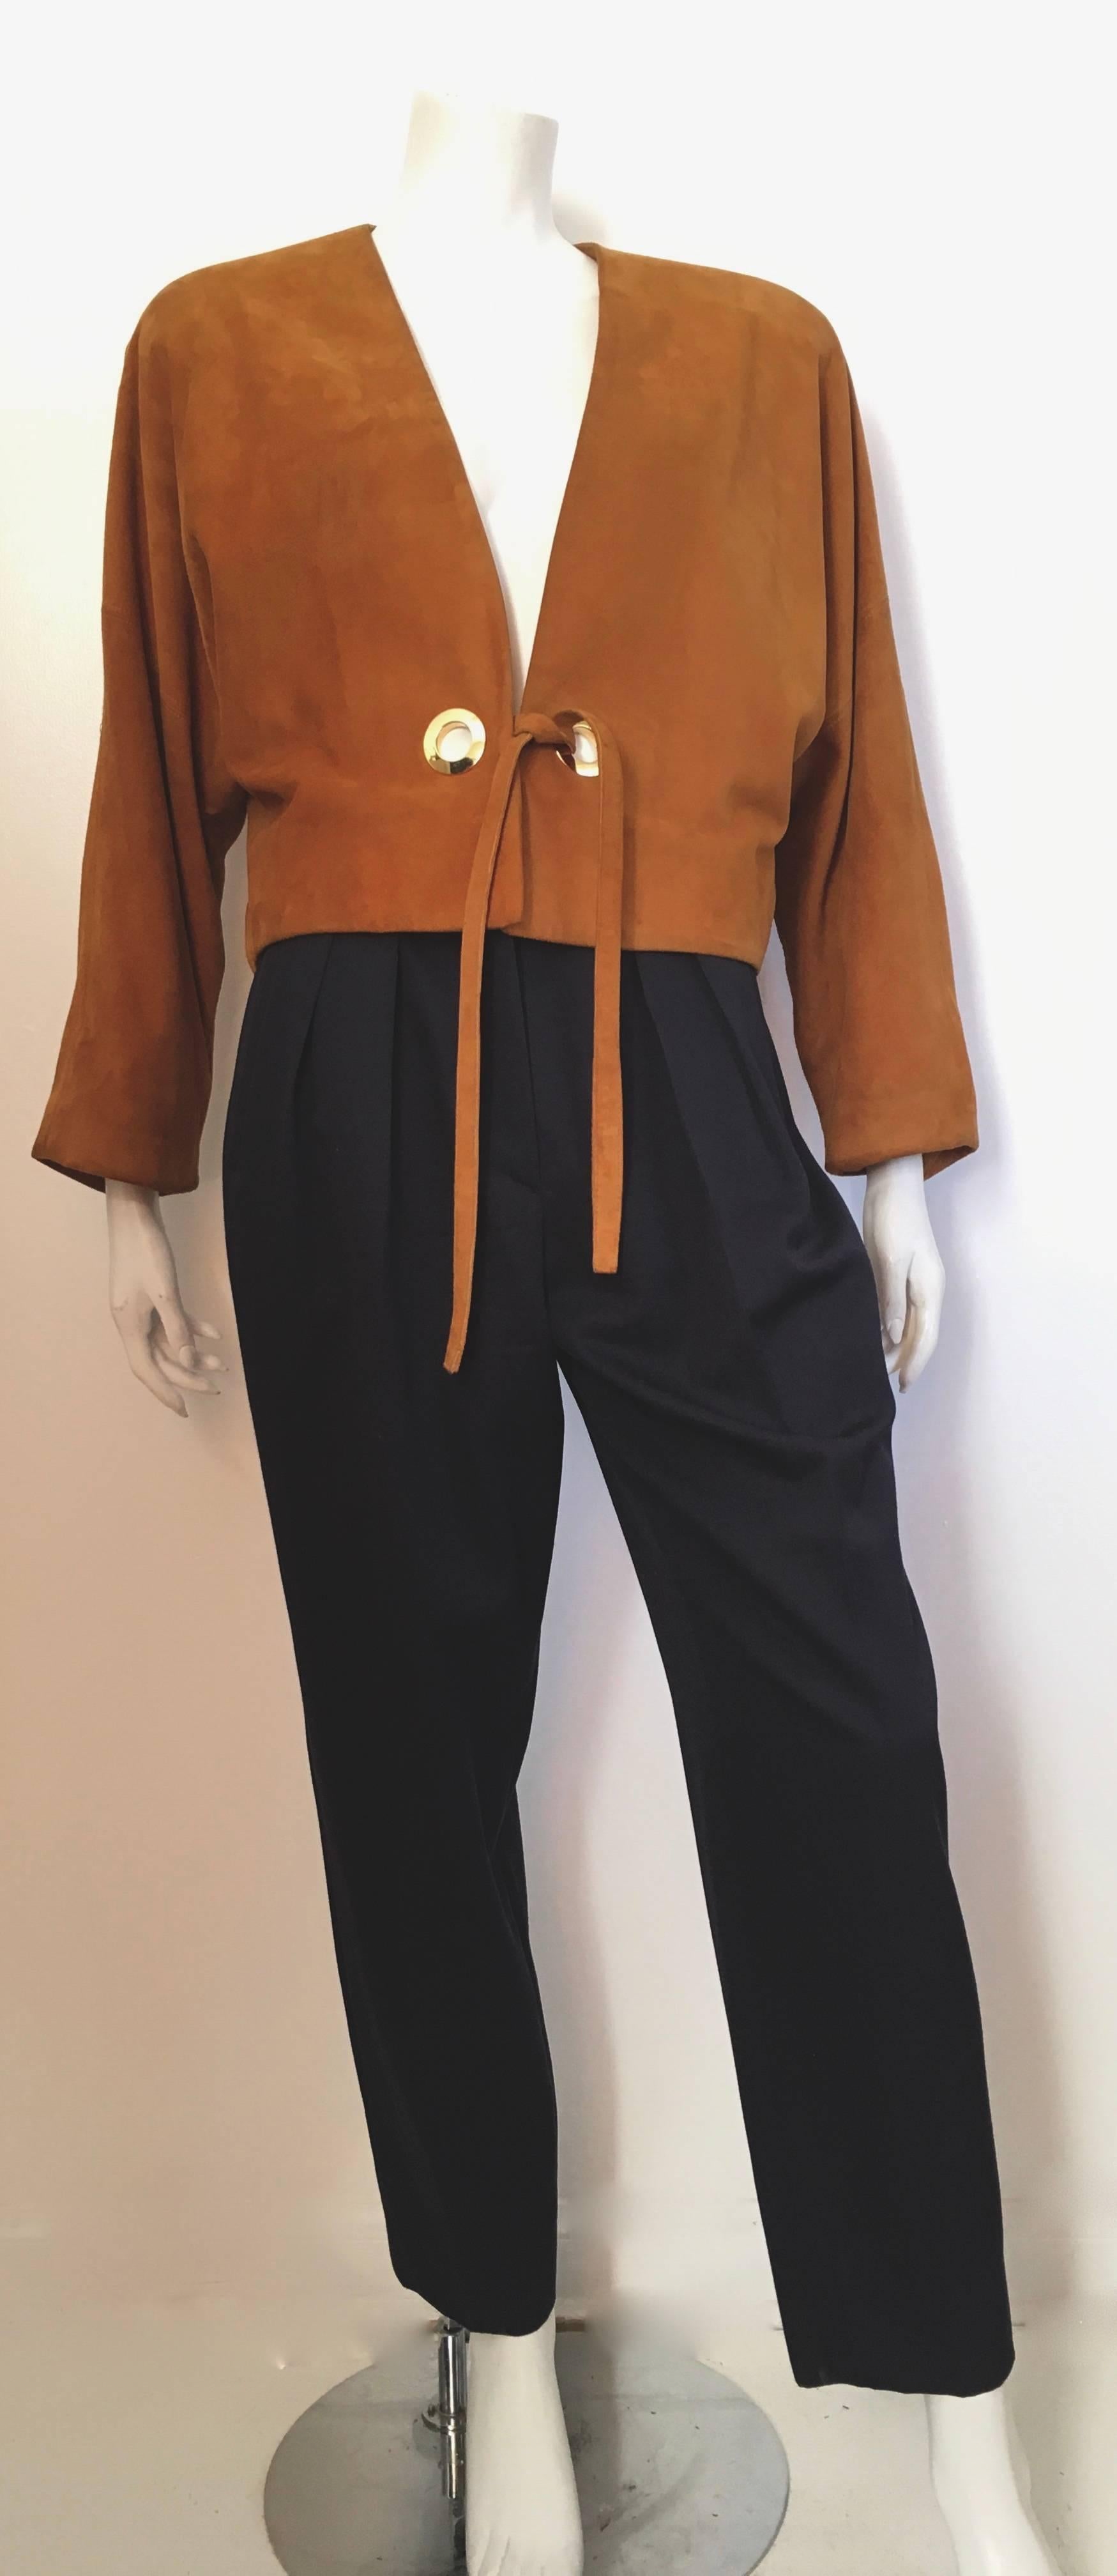 Anne Klein by Donna Karan 1980s tan suede bolero jacket is a size 10 /12. Gorgeous dolman sleeves with circle polished brass rings and ties. Jacket is lined and has shoulder pads. Classic bolero design suede jacket that can be worn with denim,